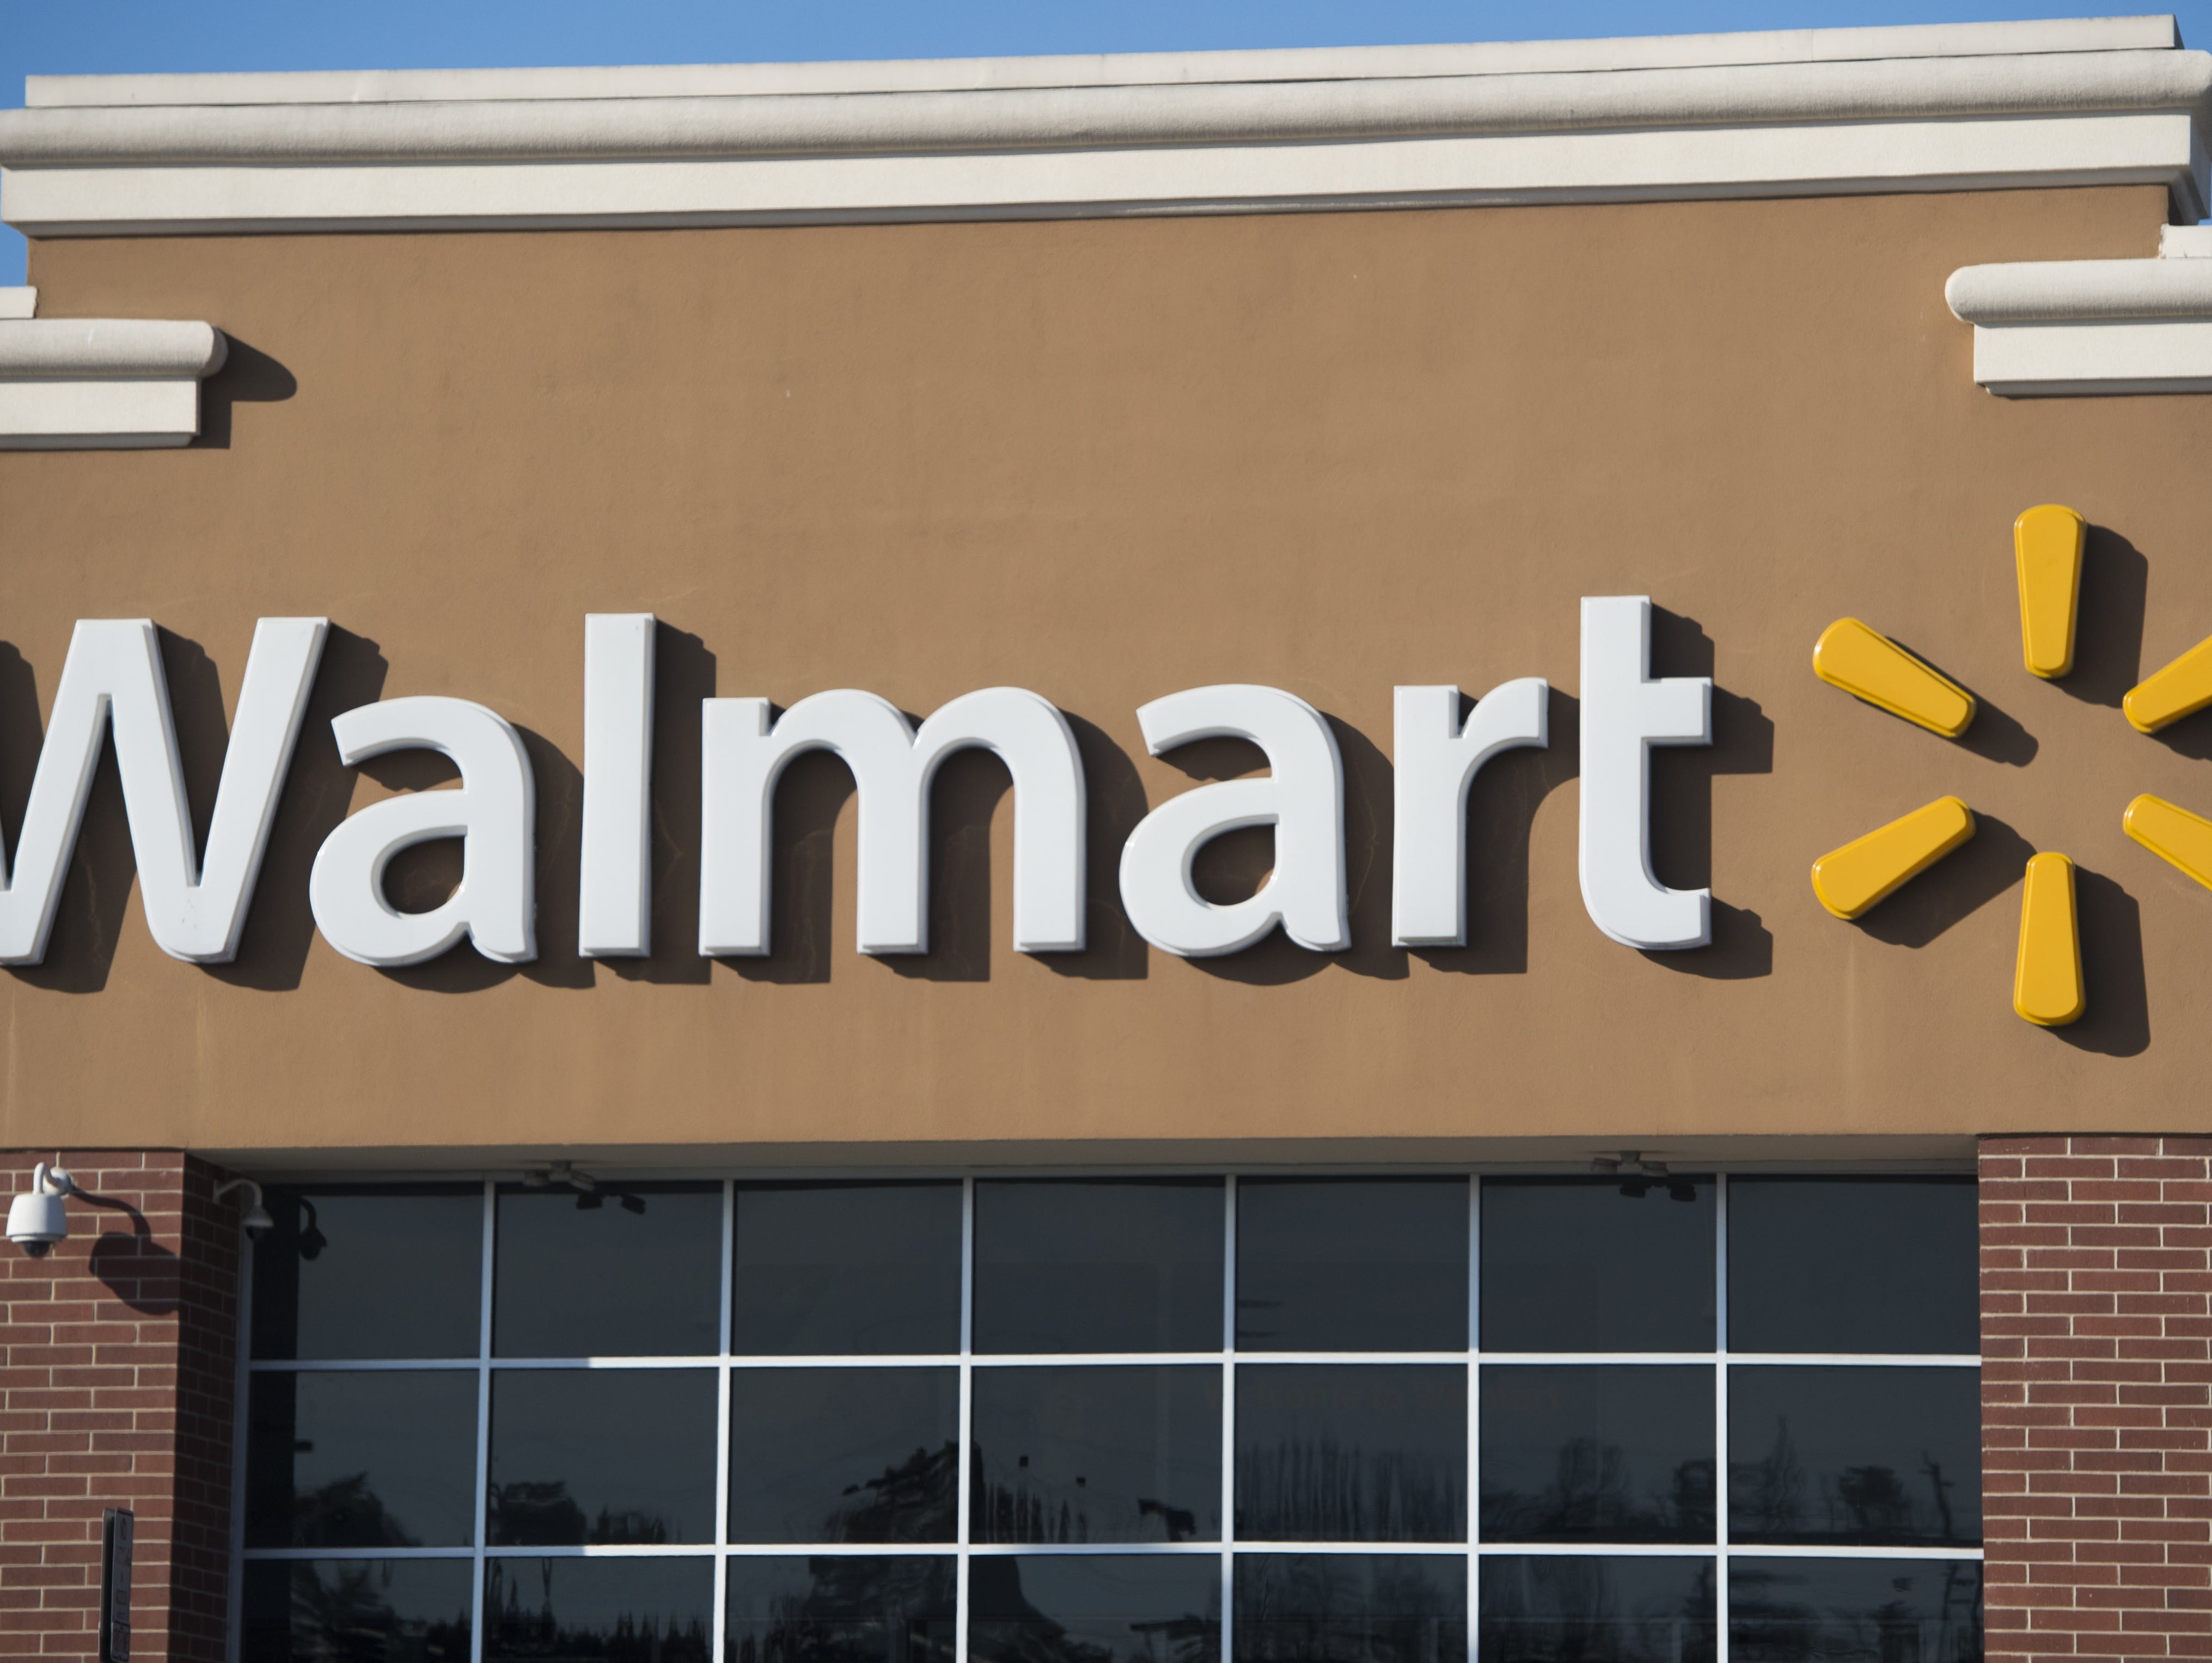 Walmart removed explicit books from its website after being alerted to the prohibited content.